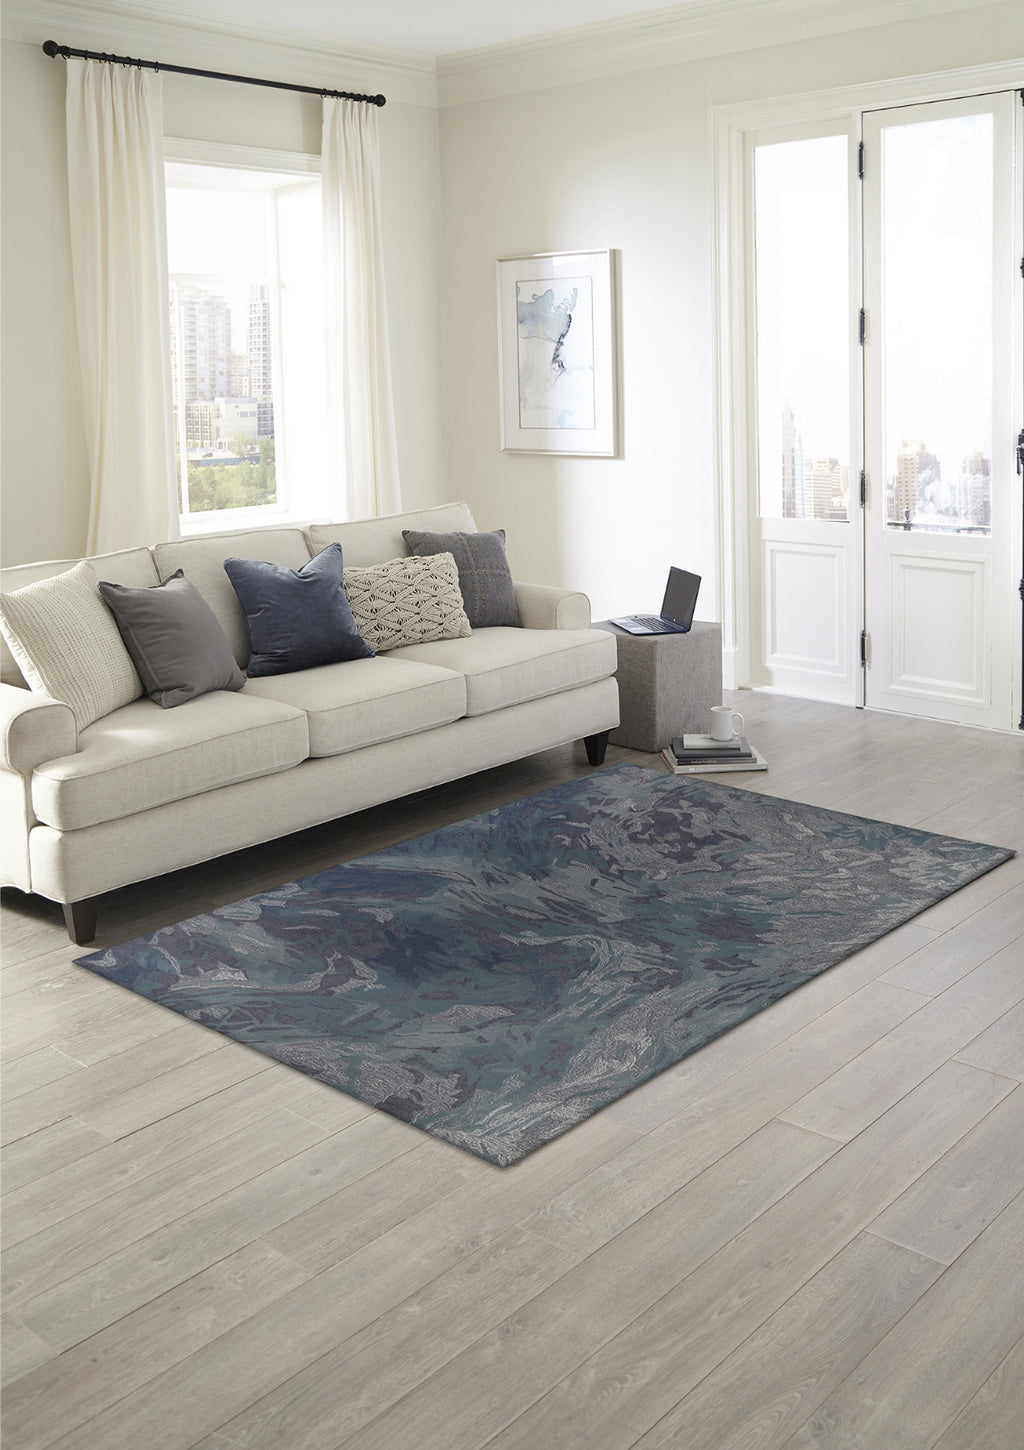 Trans Ocean Corsica 9151/93 Storm Blue Area Rug by Liora Manne Room Scene Image Feature